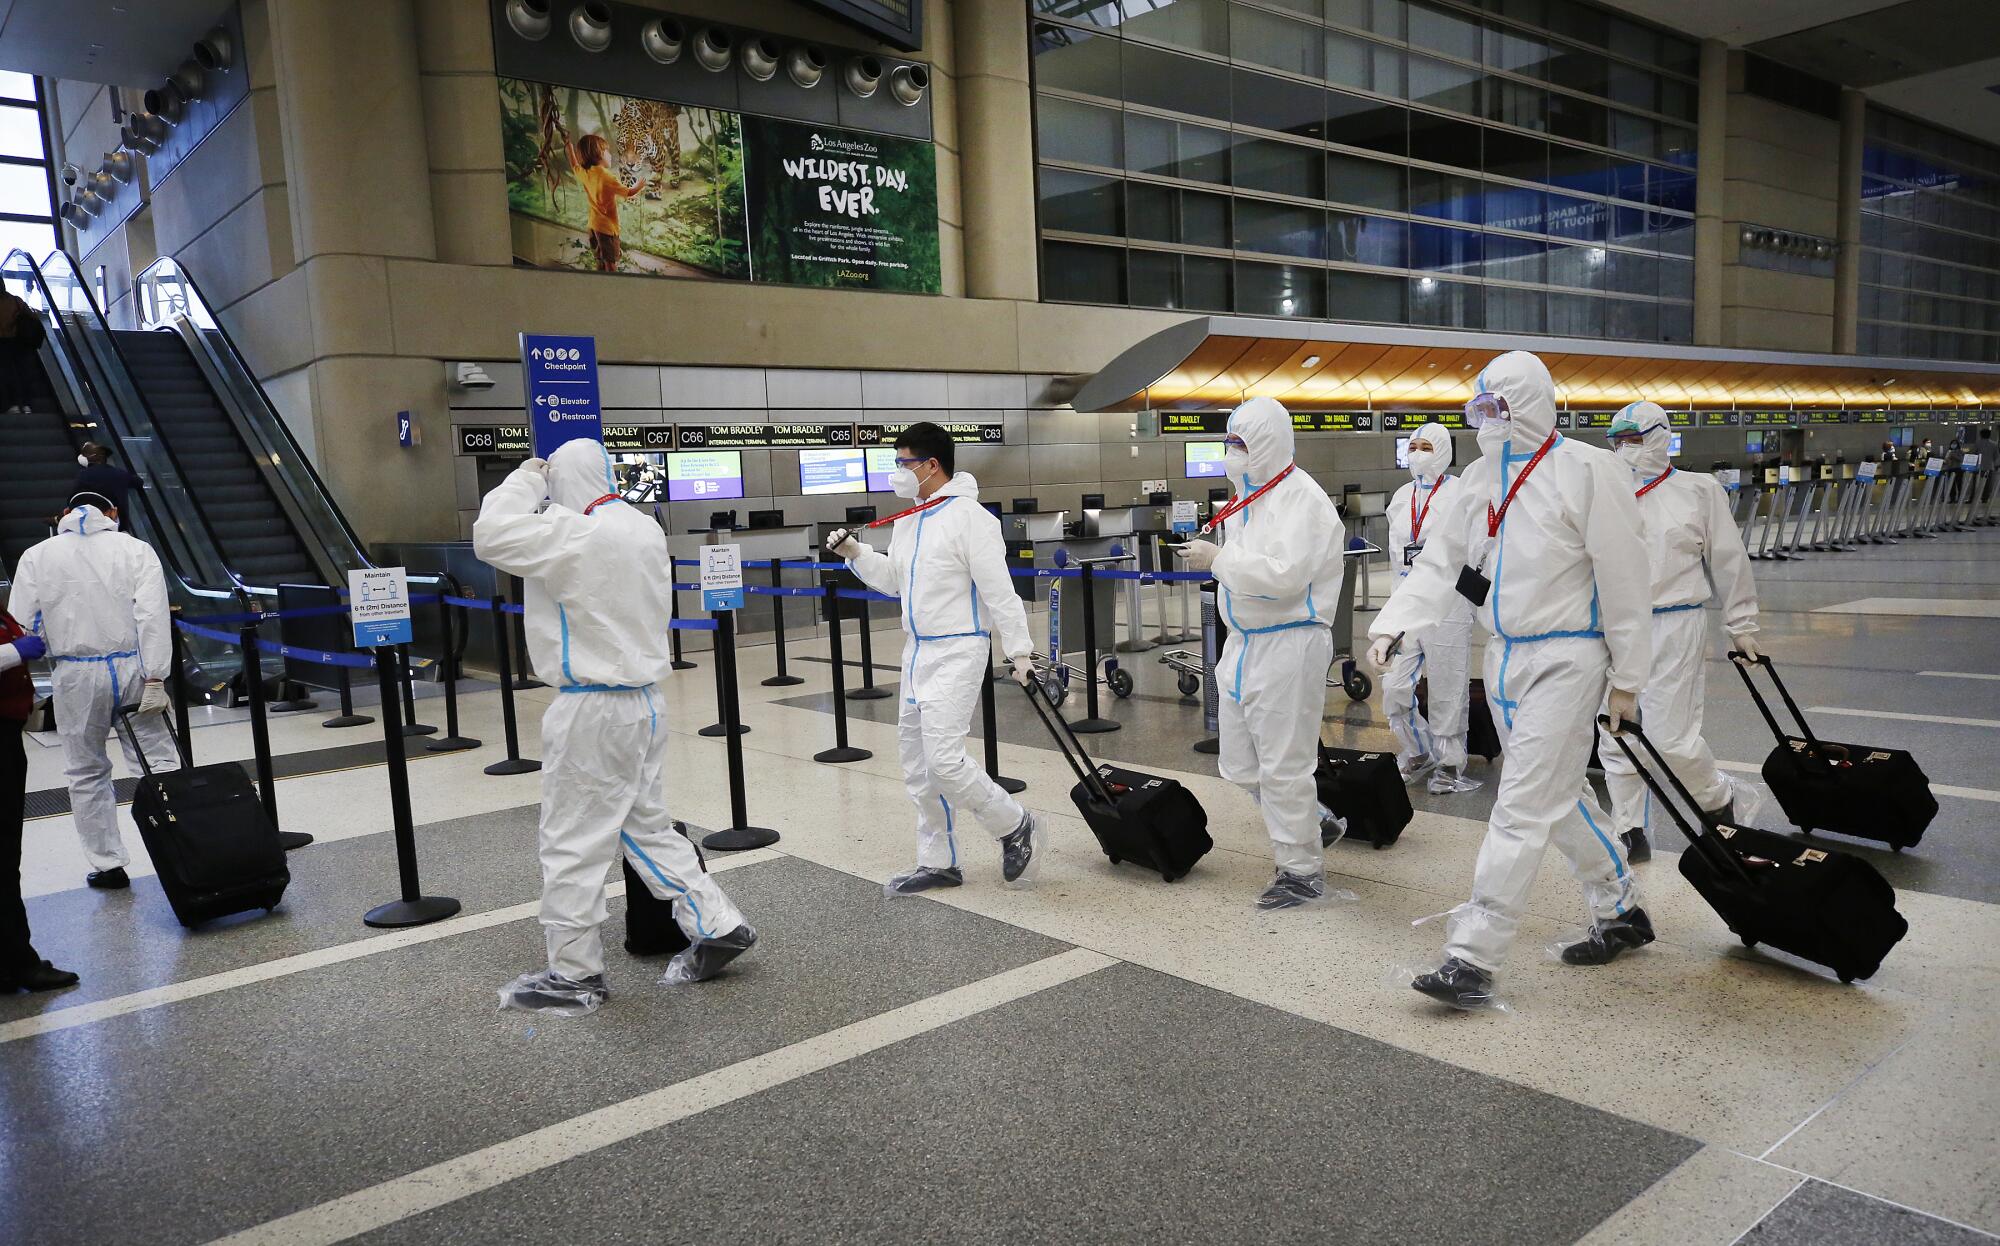 The flight crew for a Hainan Airlines flight, in full-body protective gear, walks through LAX.